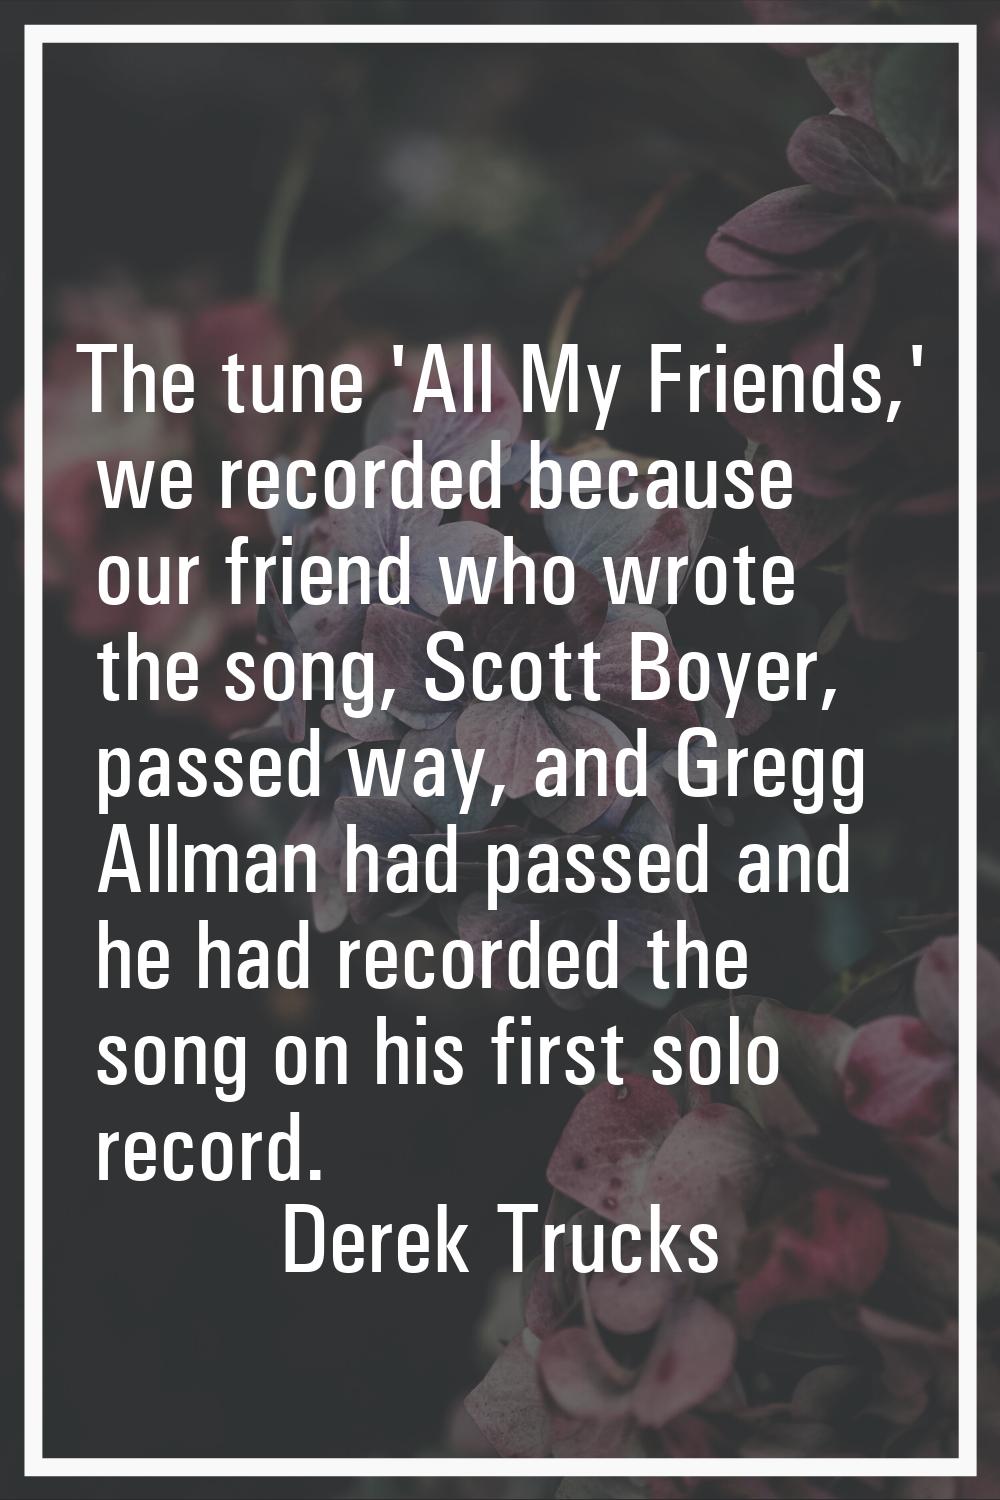 The tune 'All My Friends,' we recorded because our friend who wrote the song, Scott Boyer, passed w